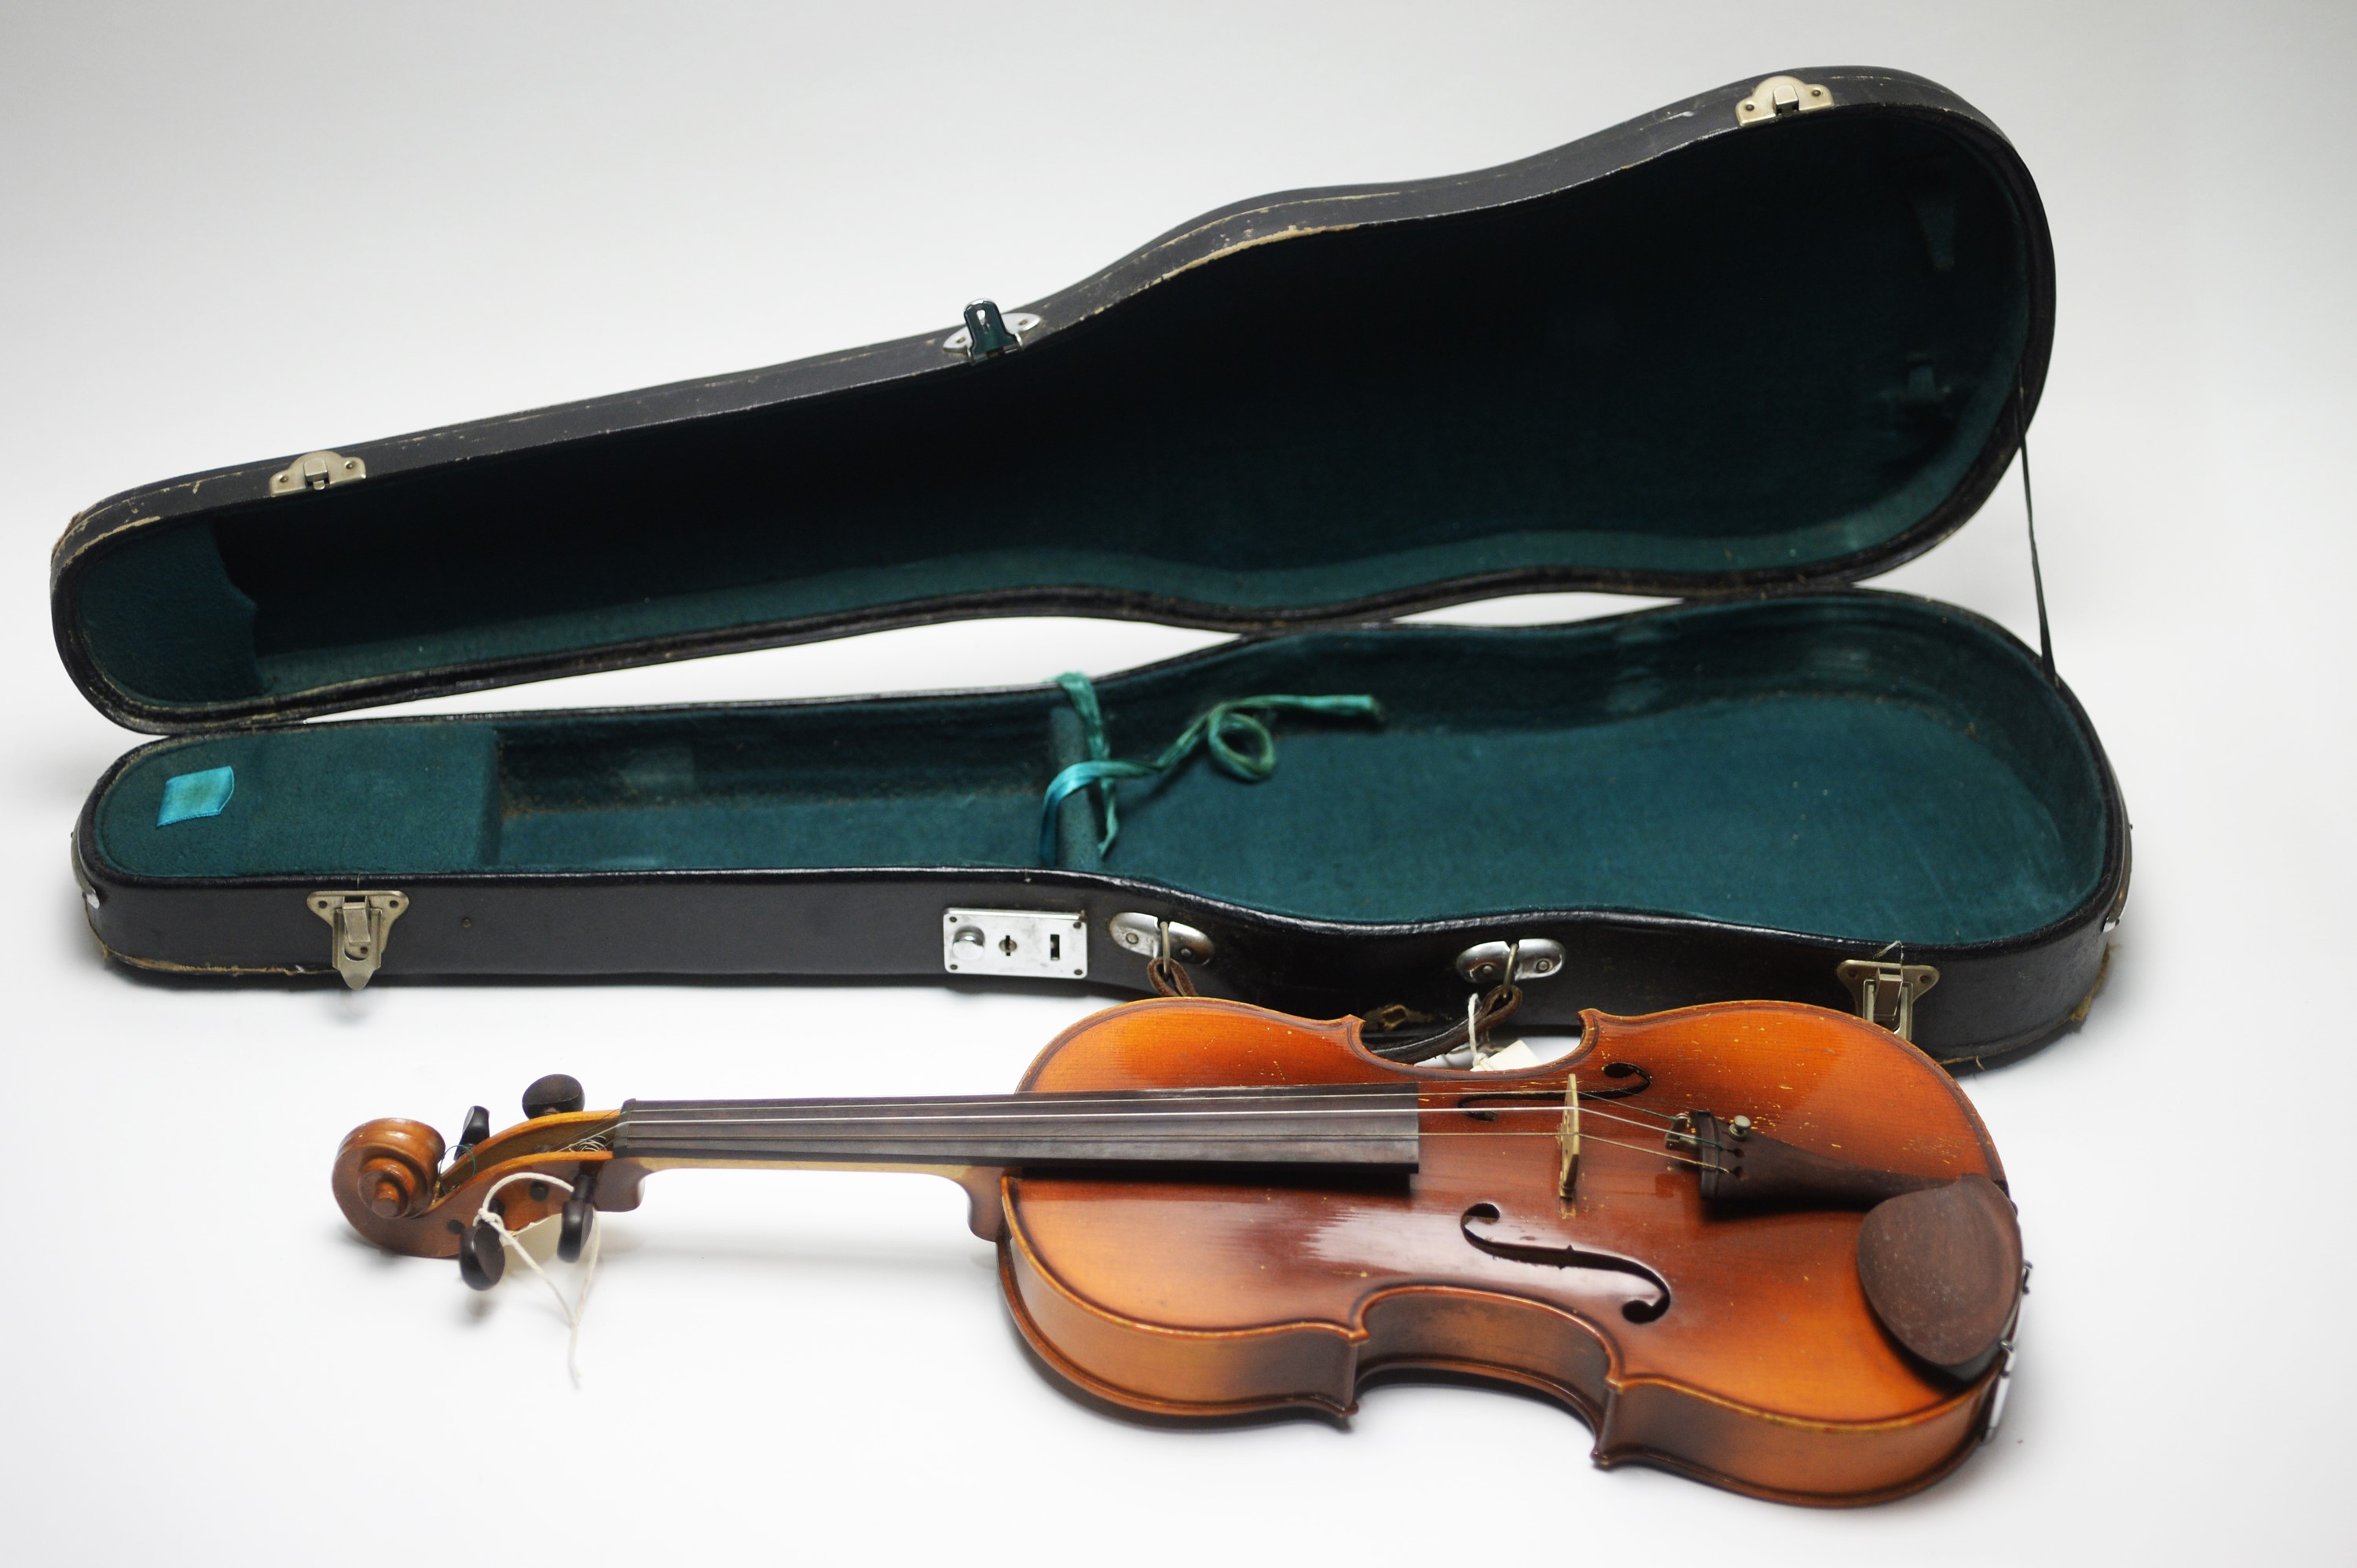 Four student violins and a bow, all cased. - Image 2 of 4